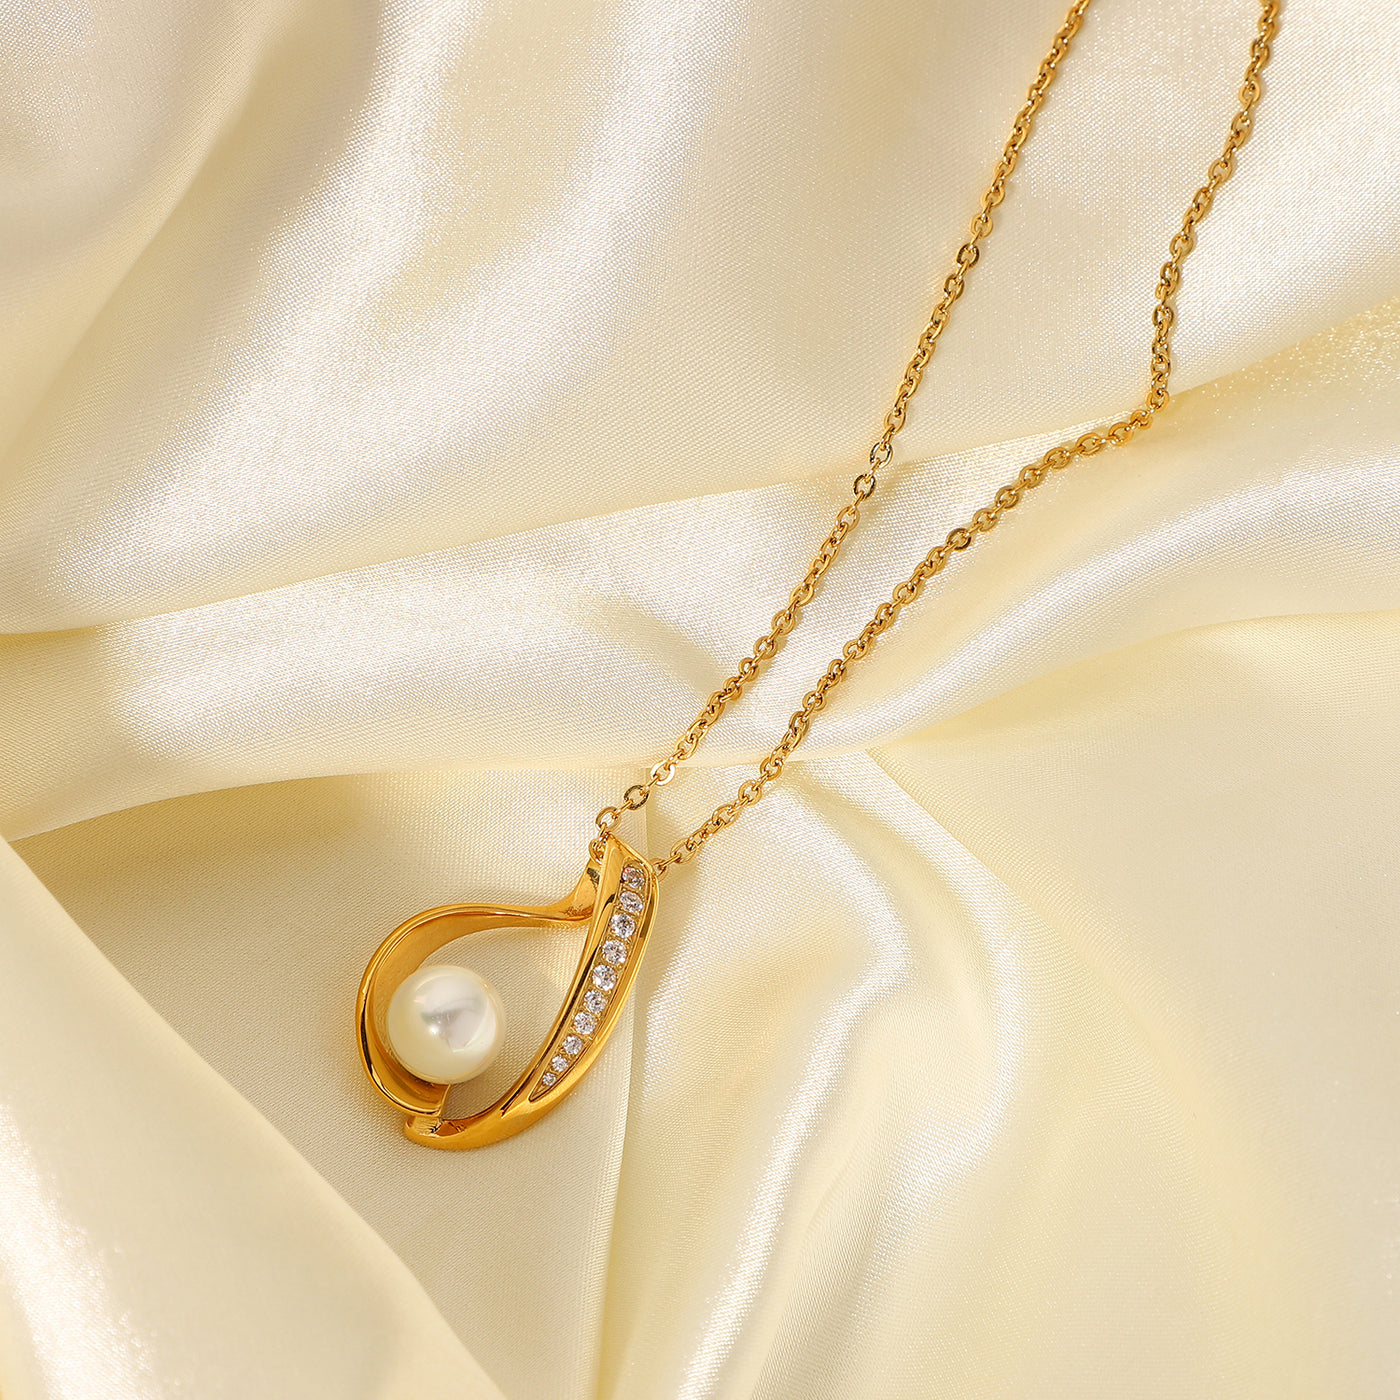 18K Gold-Filled Waterdrop Pendant Necklace